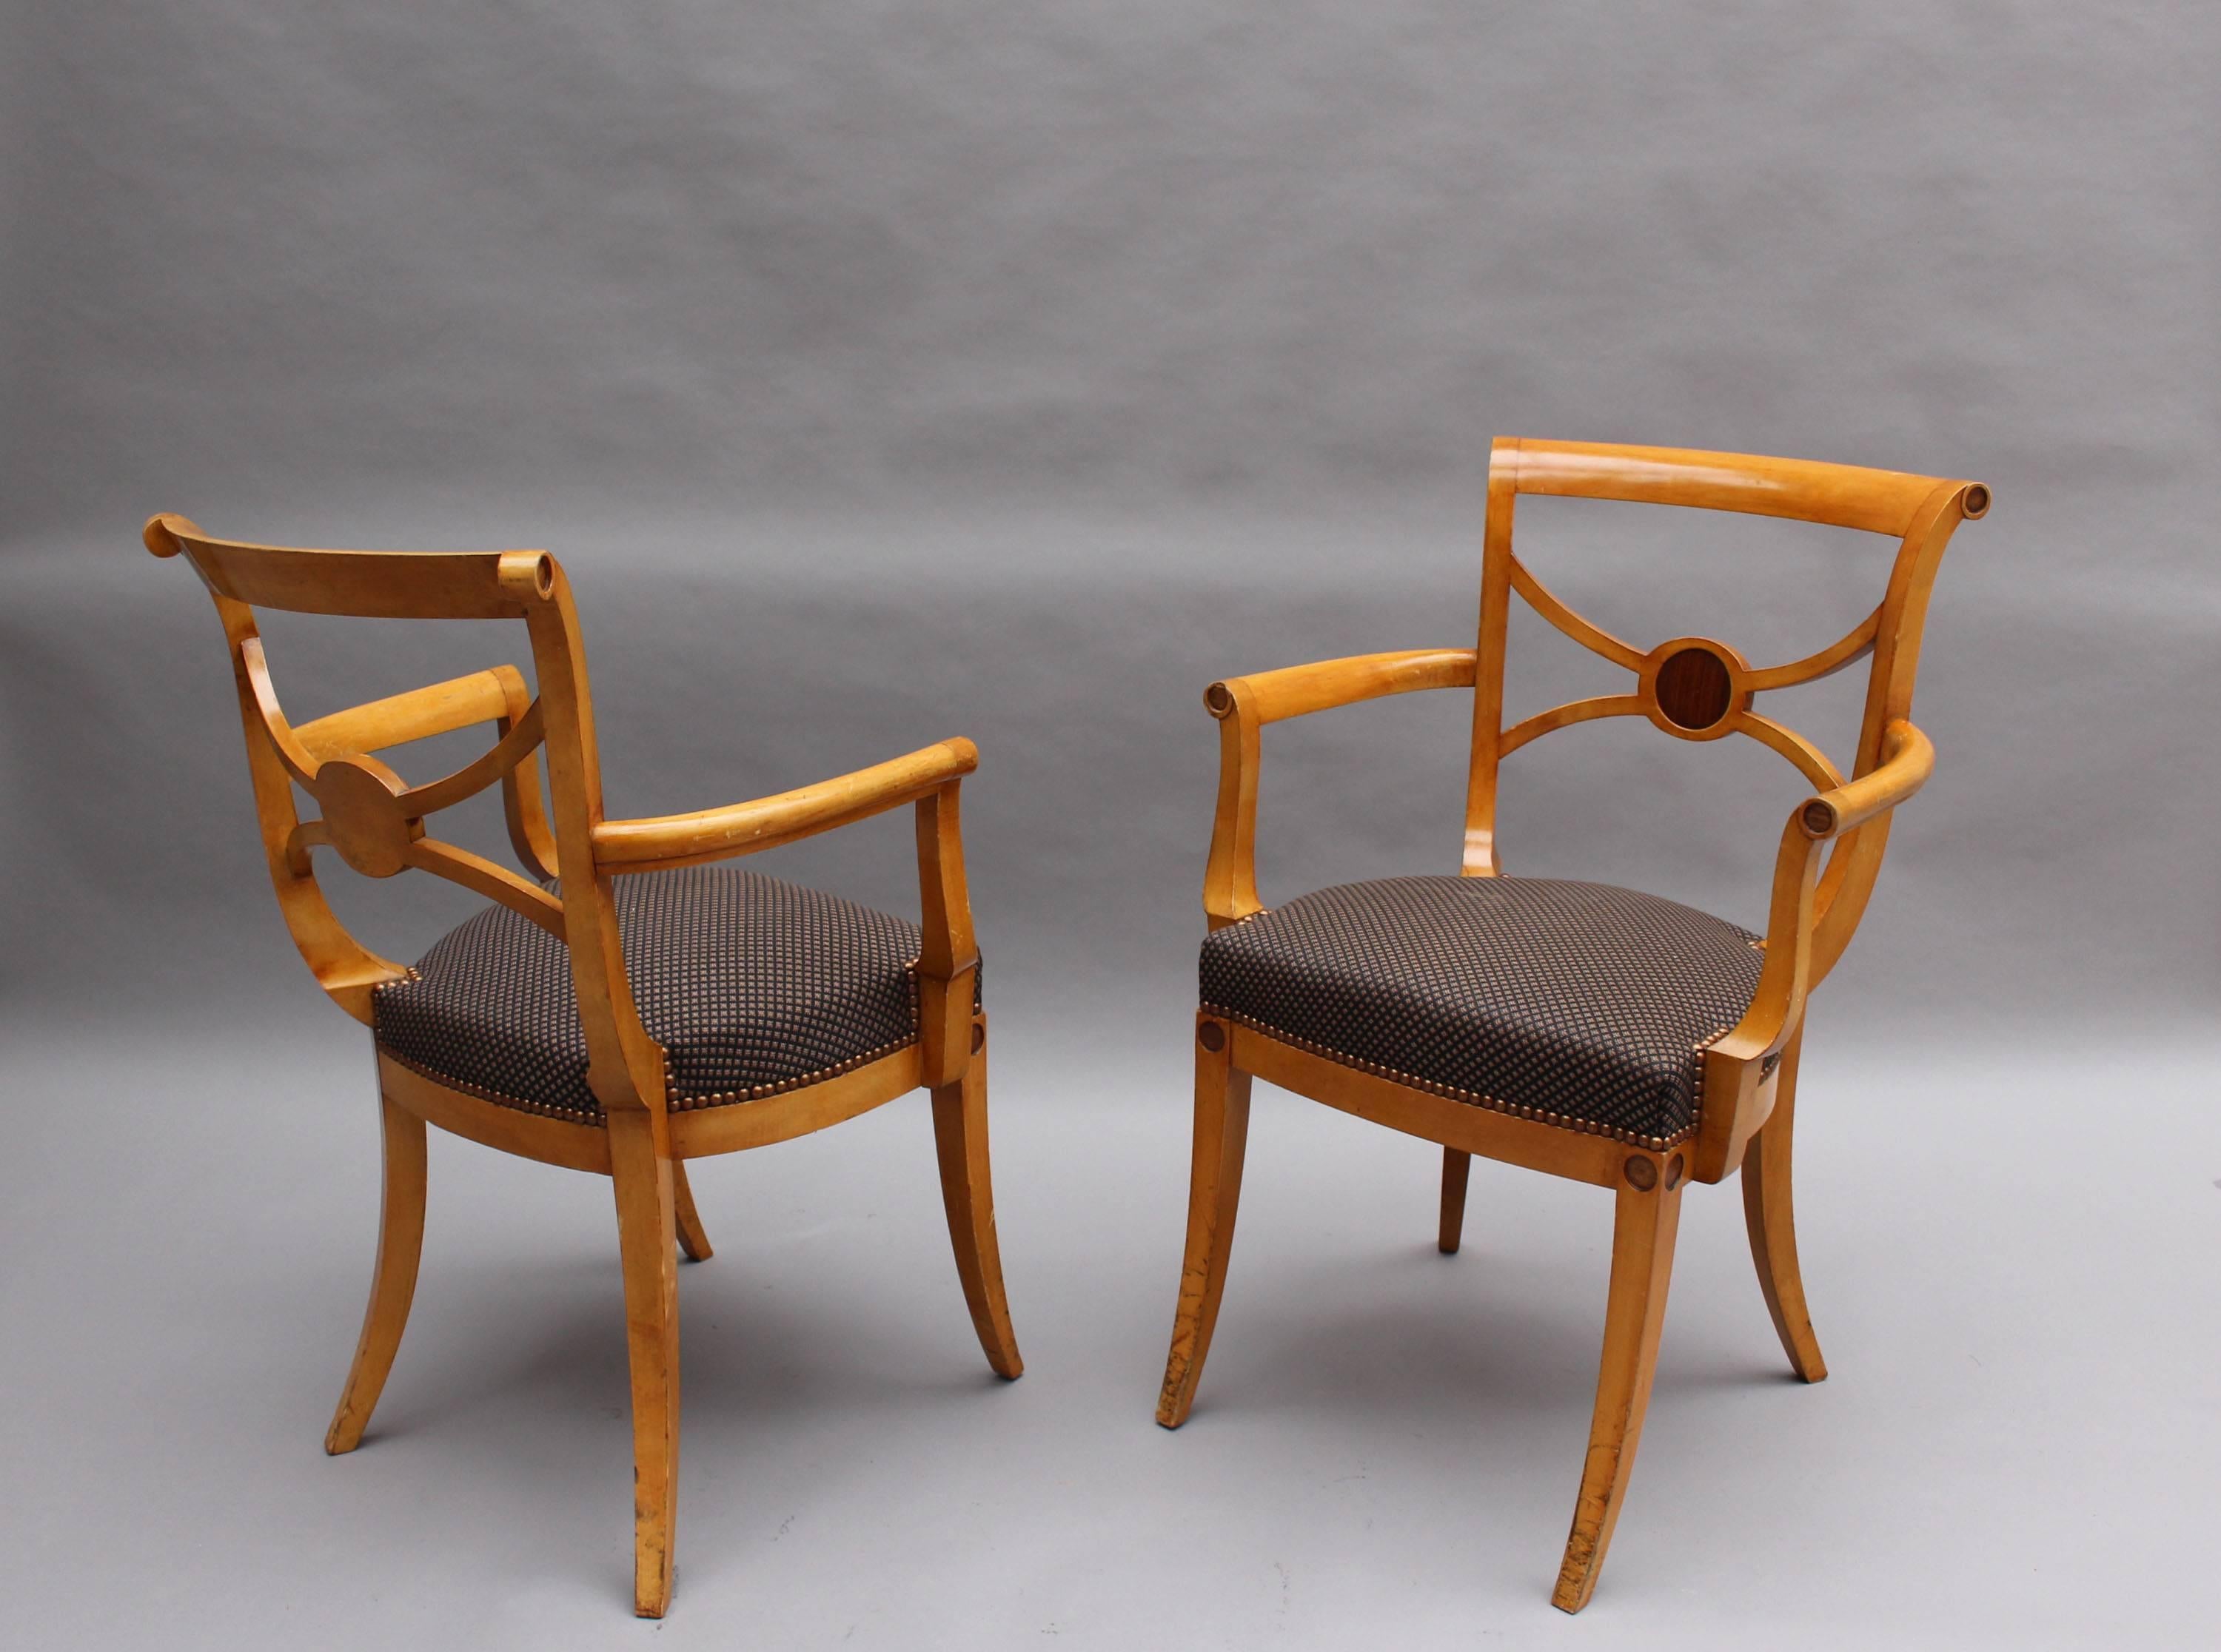 Mid-20th Century A Set of 14 Fine French Art Deco Chairs by Ernest Boiceau (12 side and 2 arm)